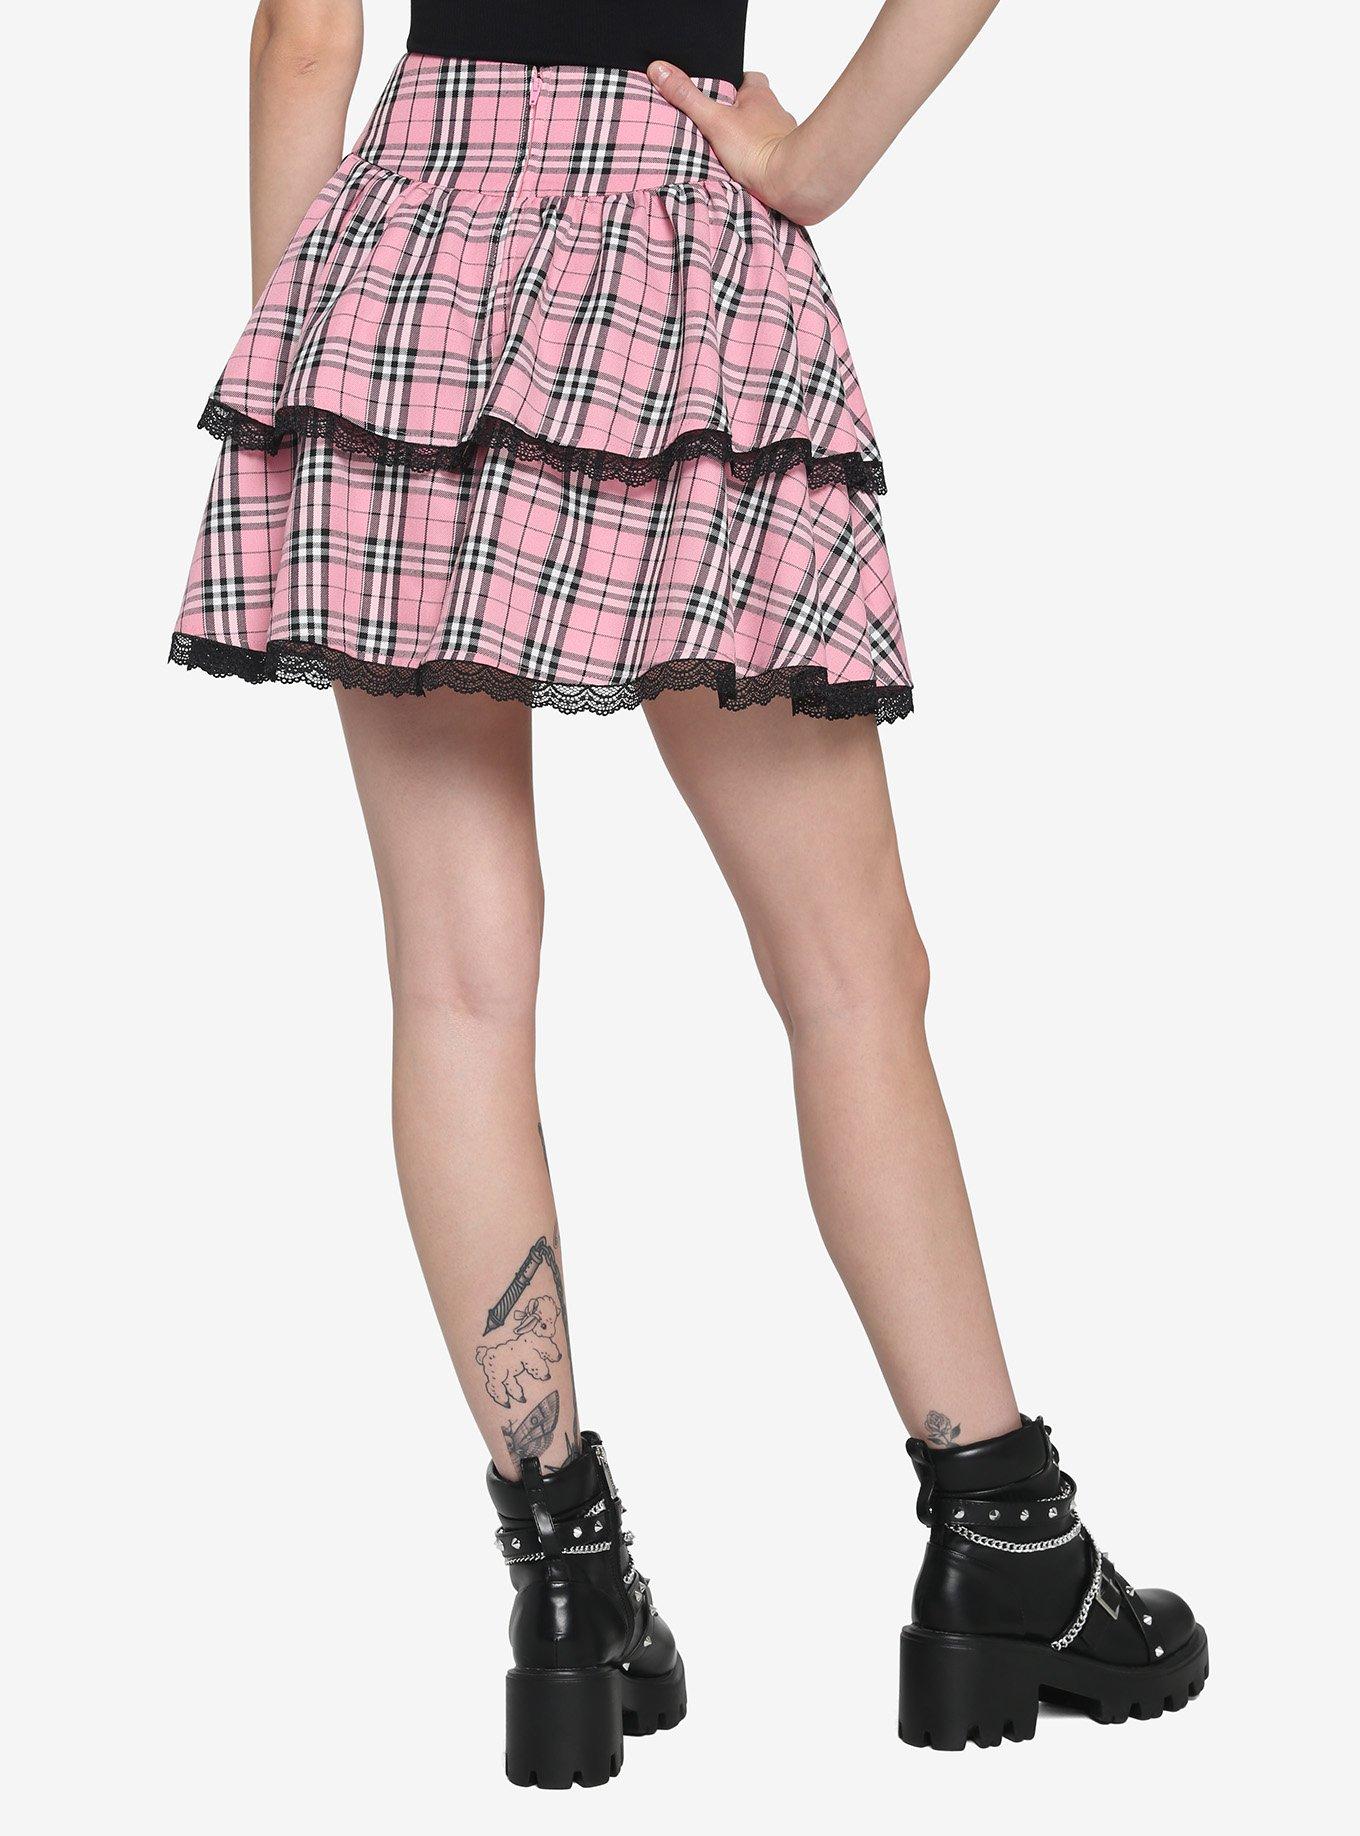 Pink Plaid Lace-Up Tiered Skirt, PLAID - PINK, alternate